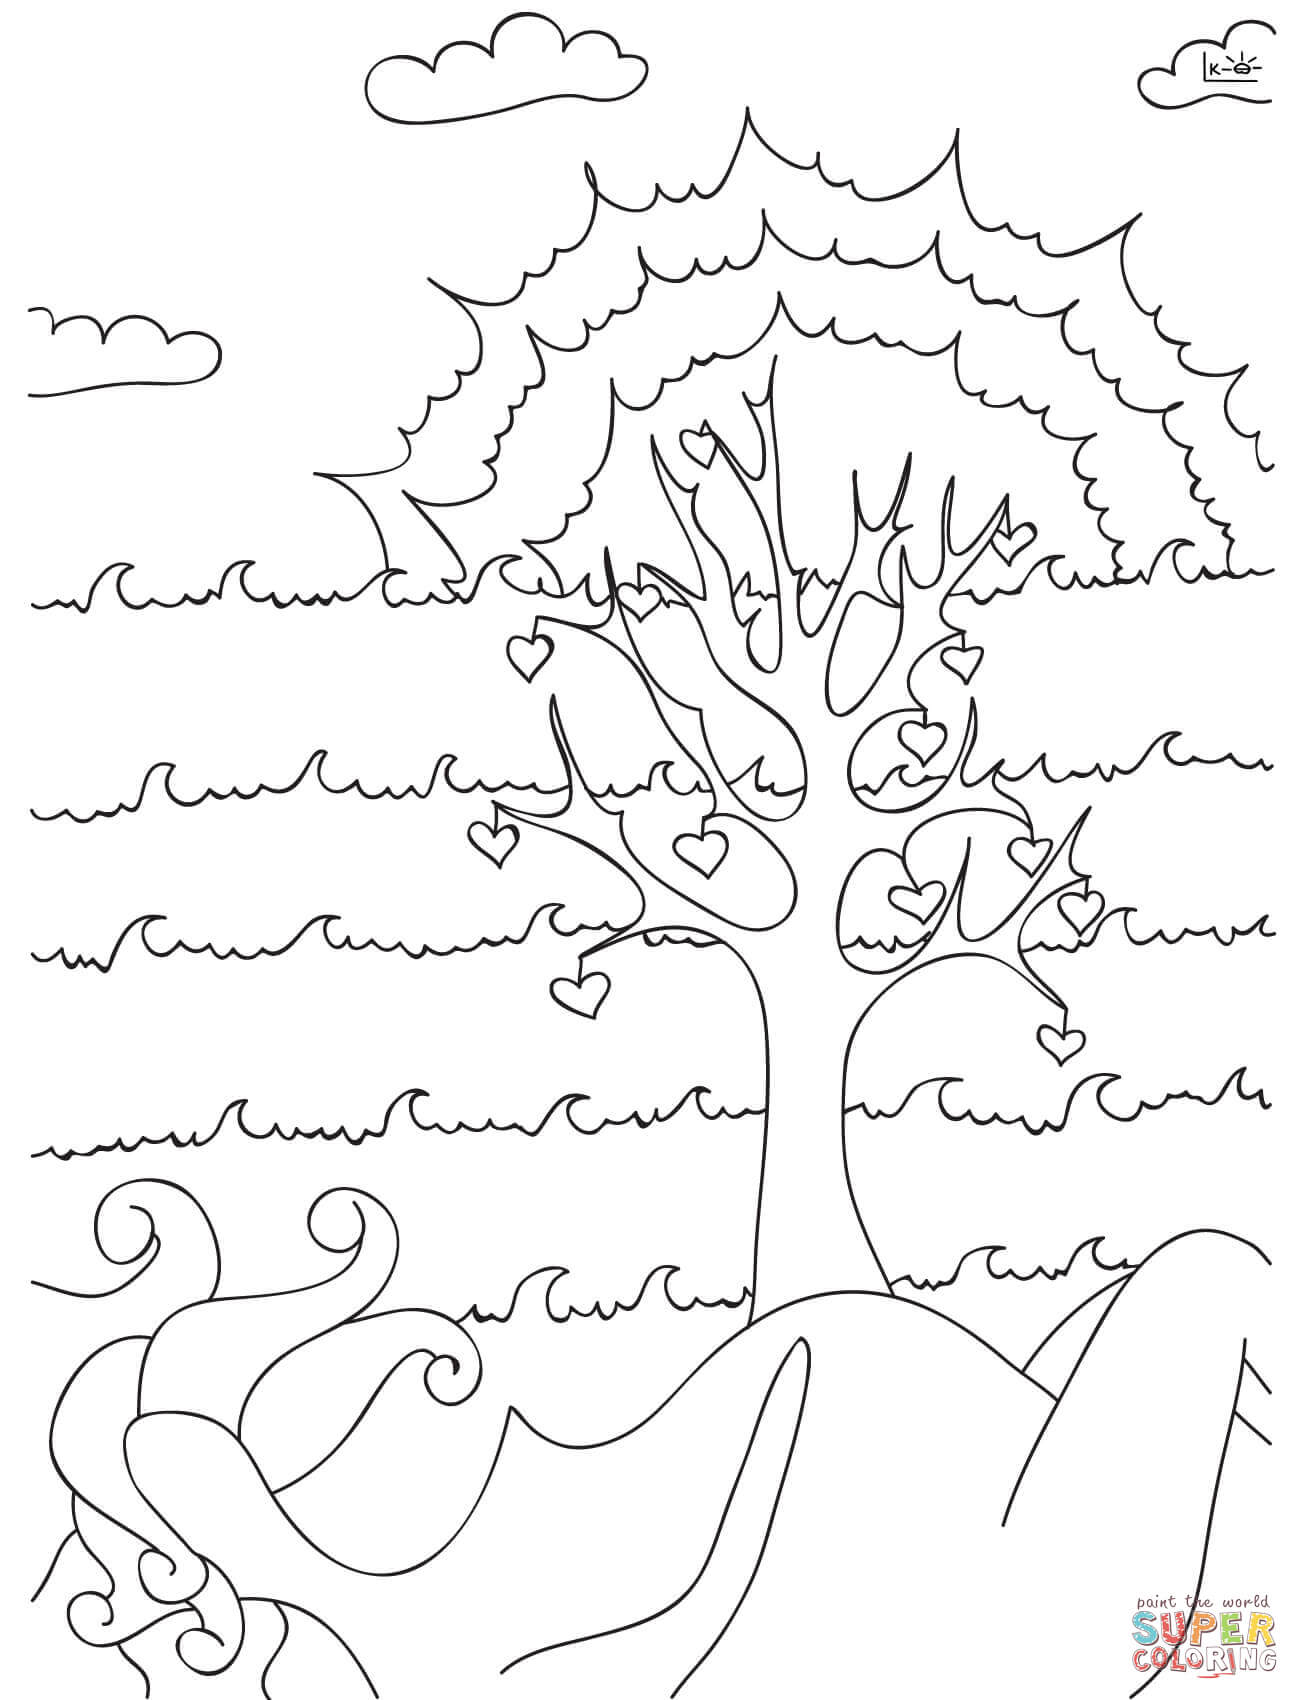 Tree of Life coloring page | Free Printable Coloring Pages